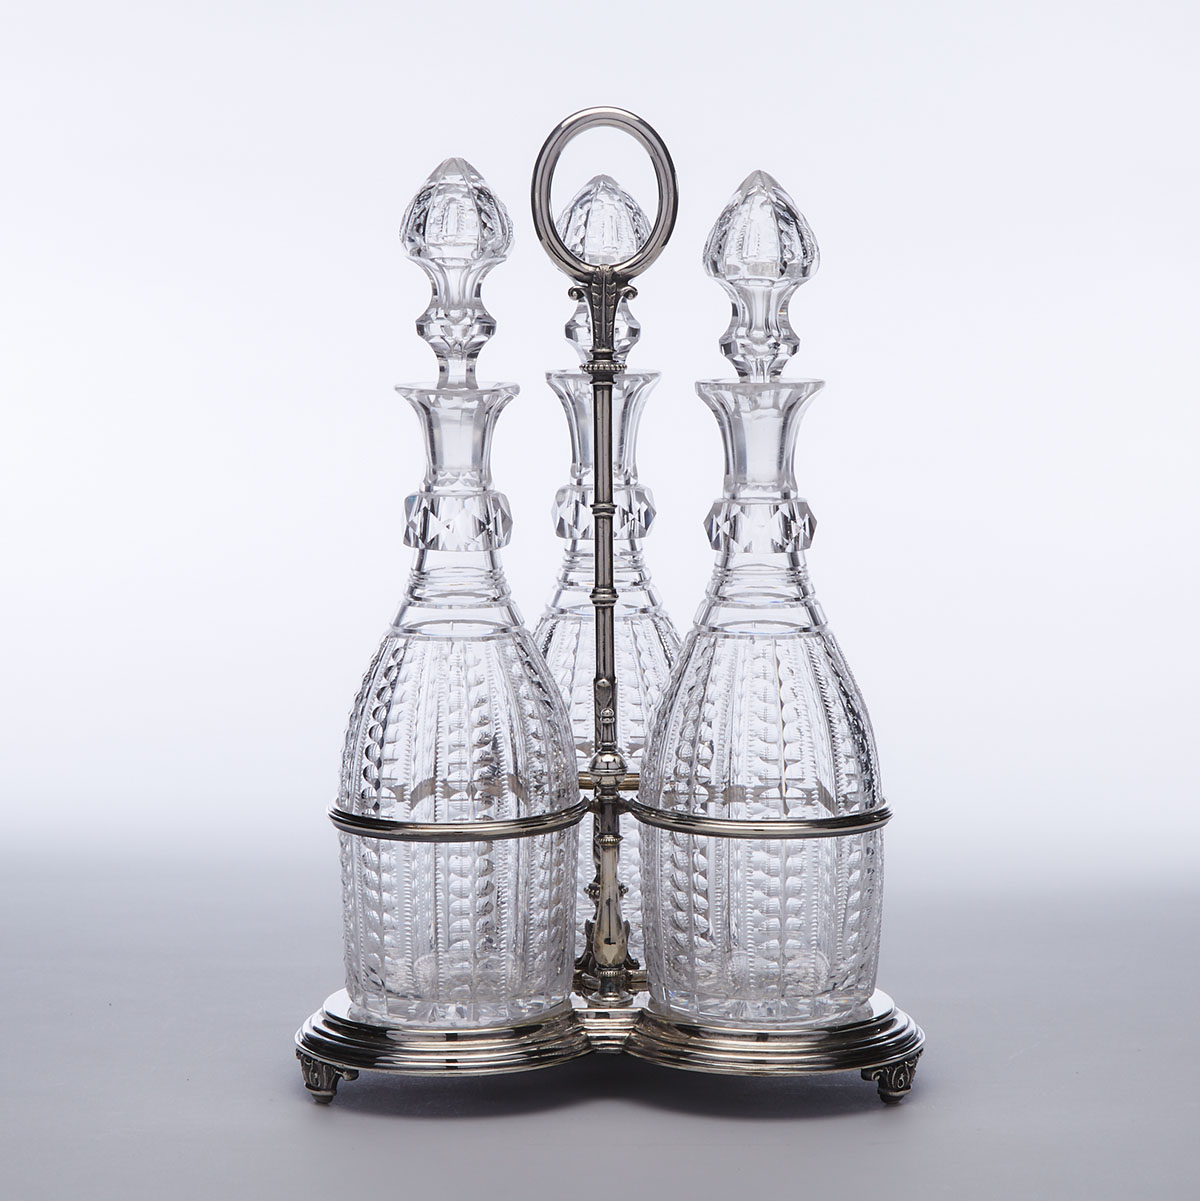 Victorian Silver Plate and Cut Glass Three-Bottle Tantalus, William Hutton & Sons, late 19th century